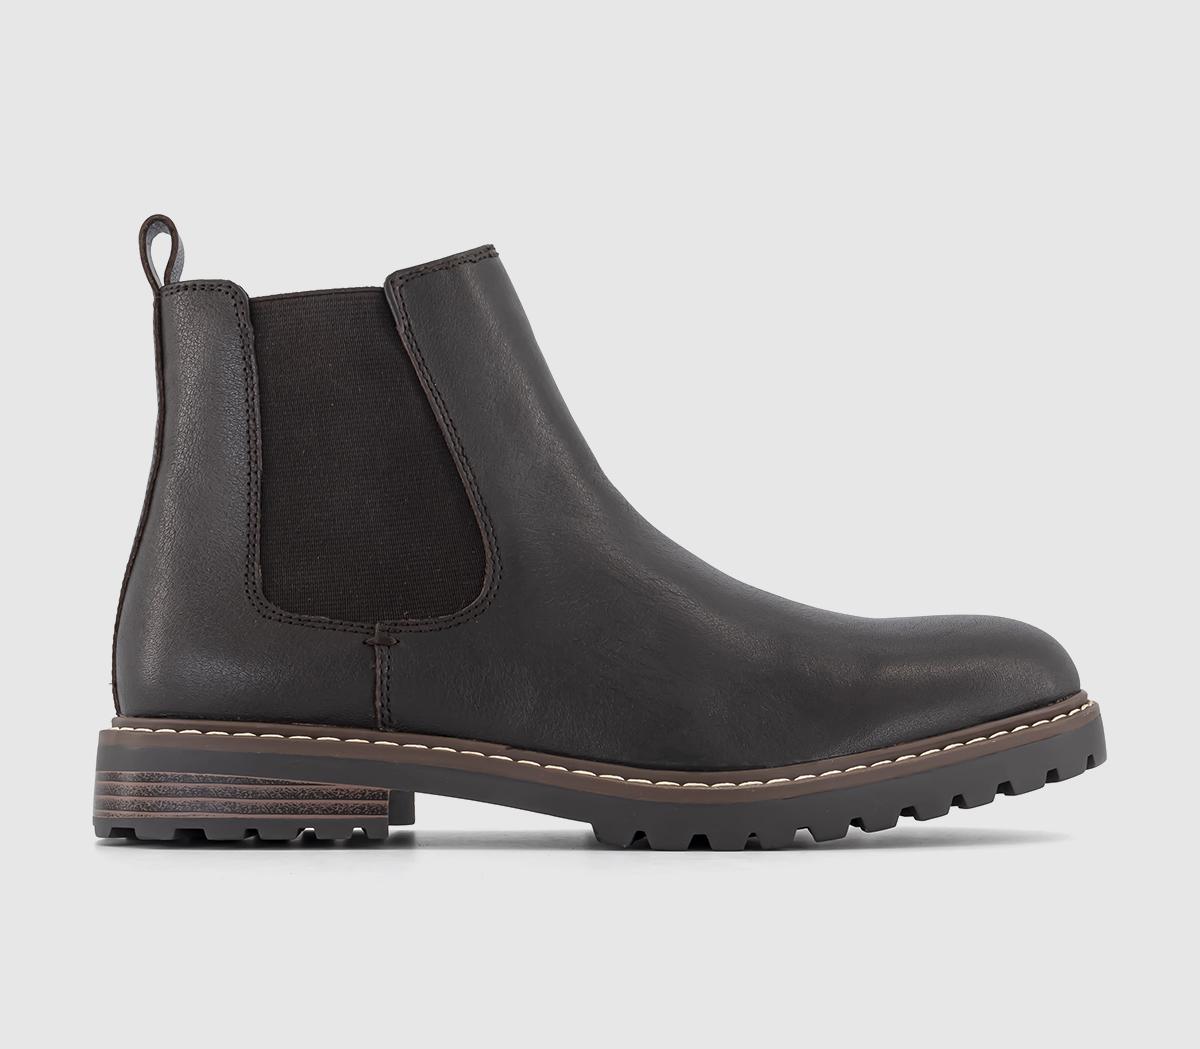 OFFICE Burford Cleated Chelsea Boots Brown Leather - Men’s Boots